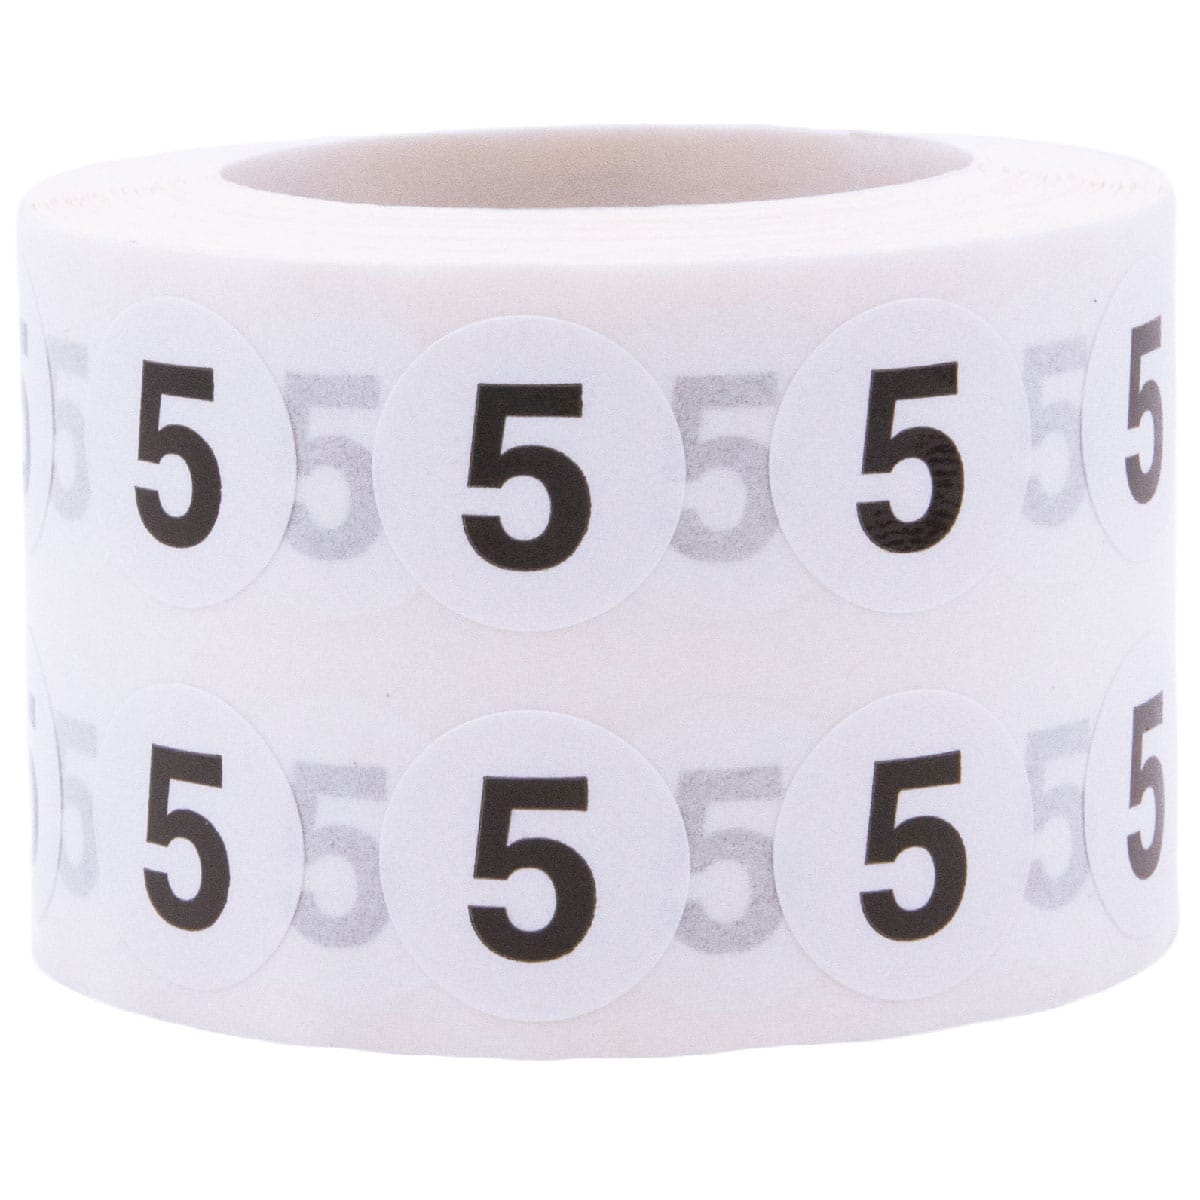 1 - 5 Numbered 1/2 Round Labels - InStock Labels